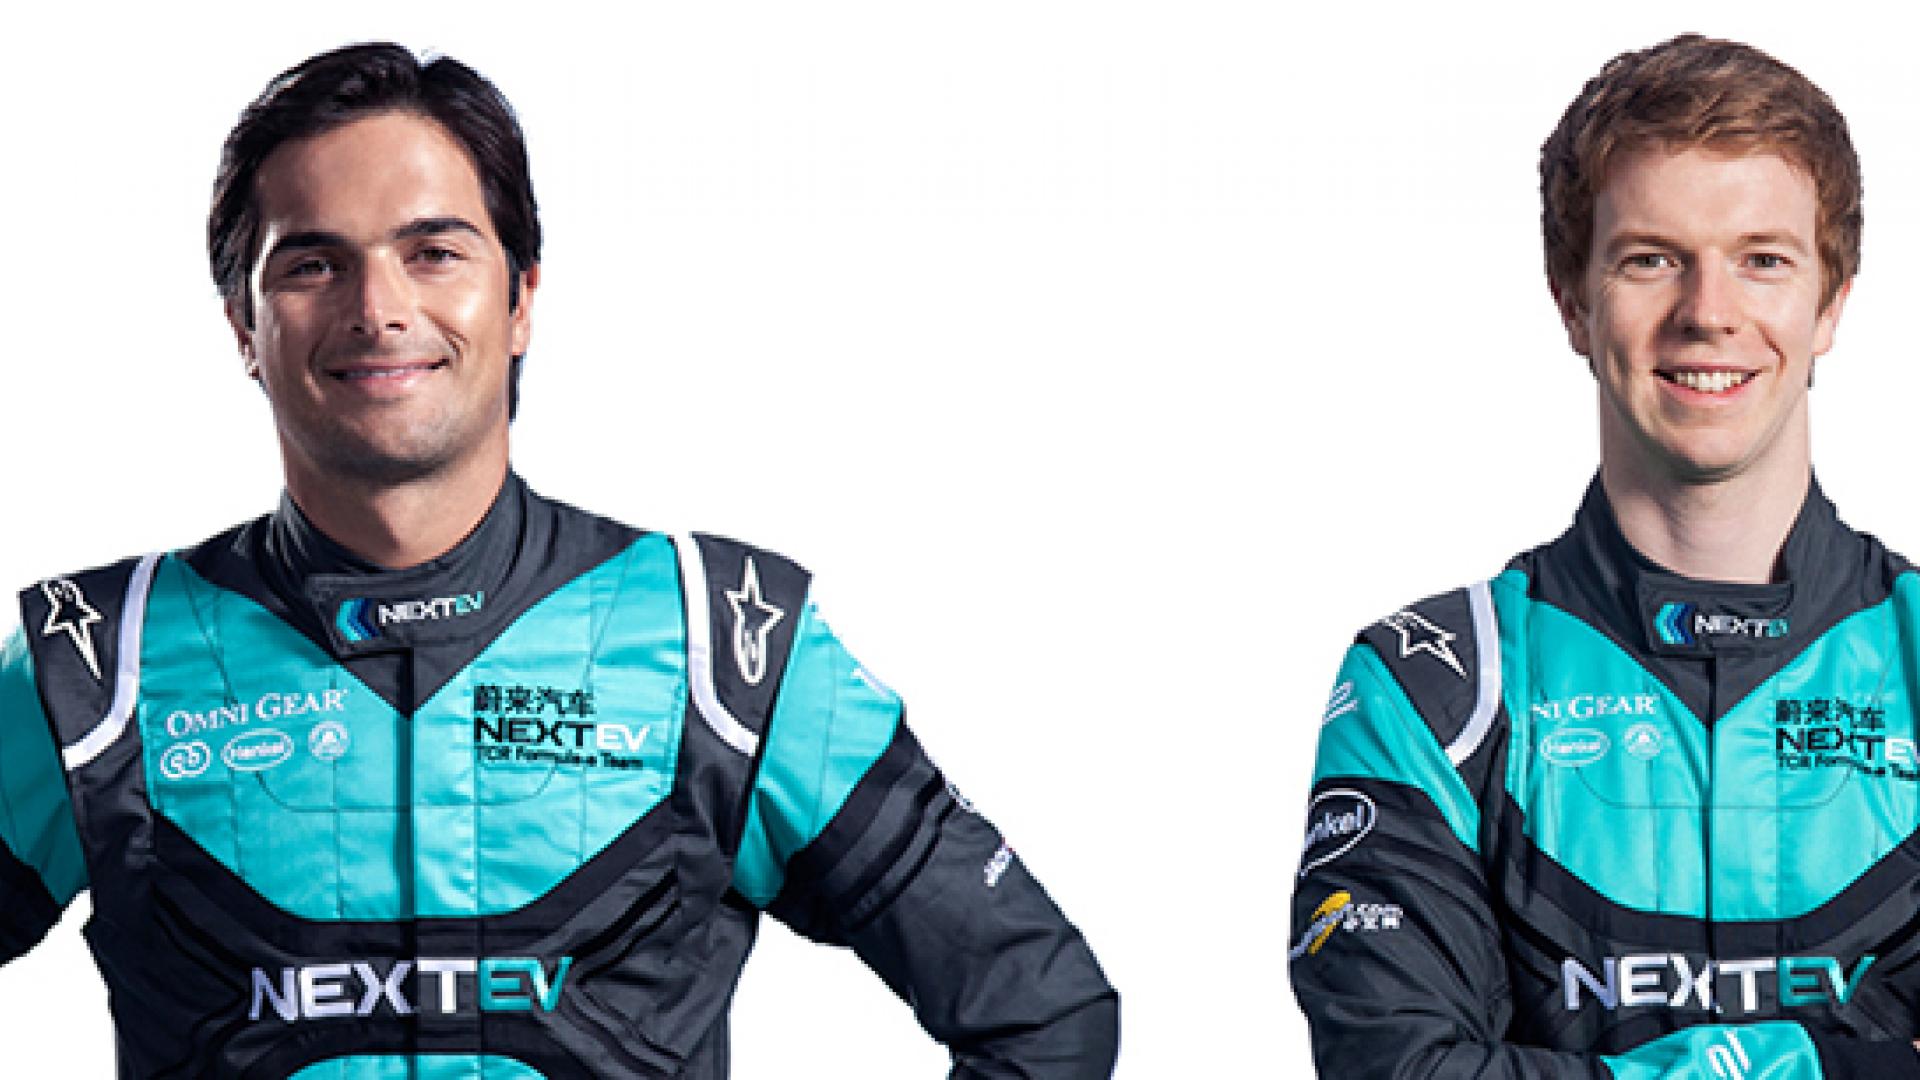 NEXTEV TCR reveal new livery and drivers for the 2015-16 season